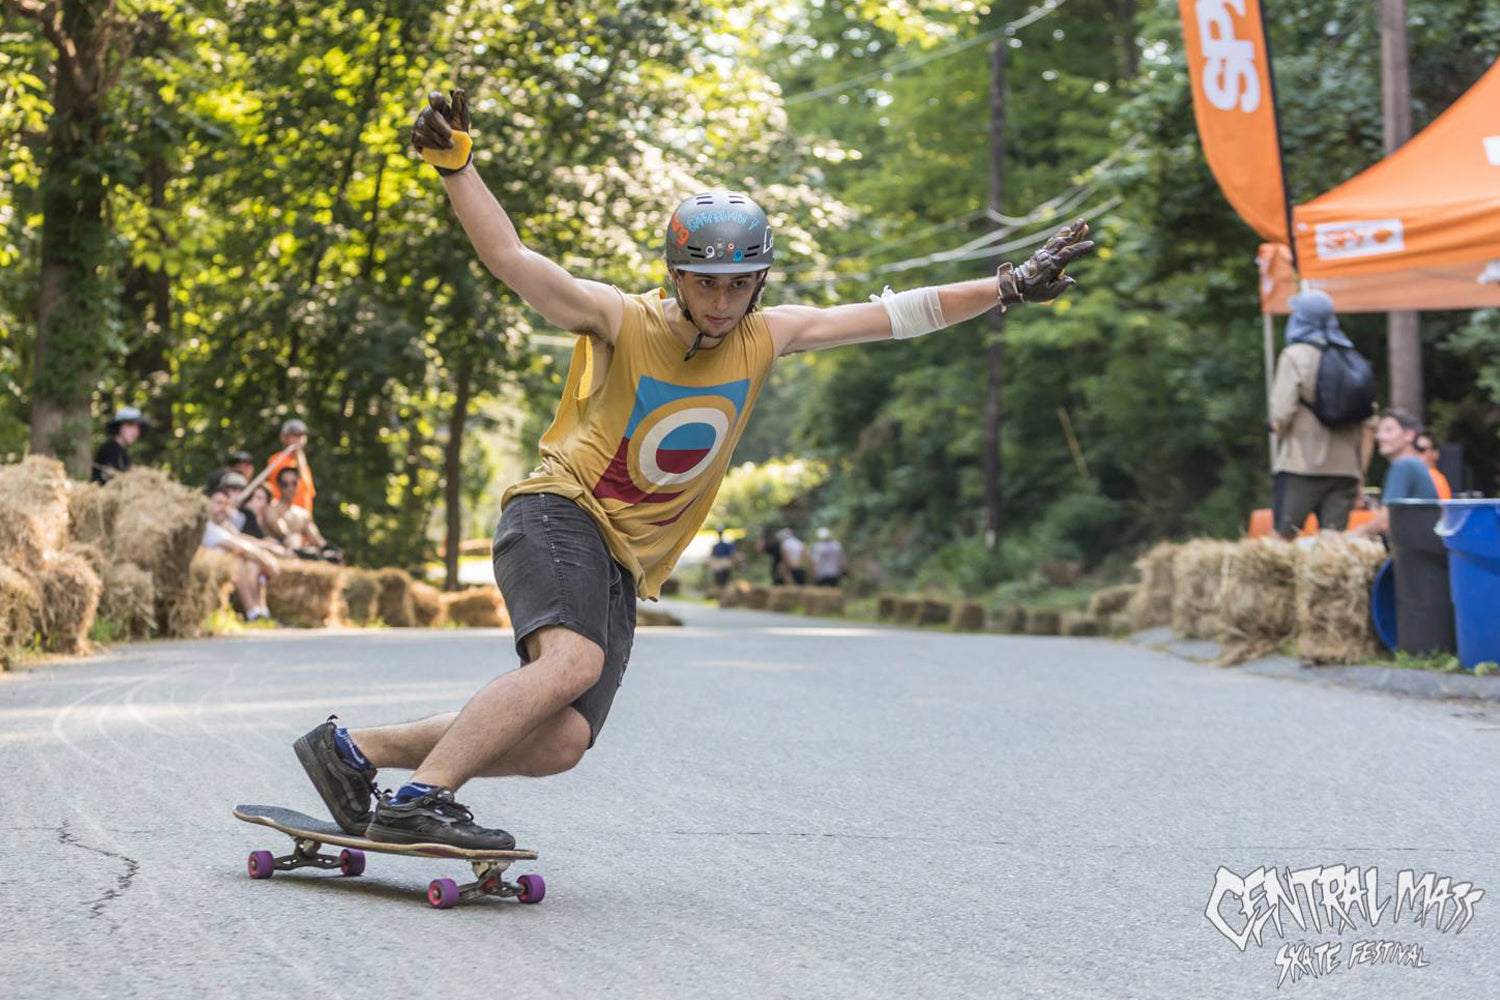 What You Missed at Central Mass Skate Festival 9